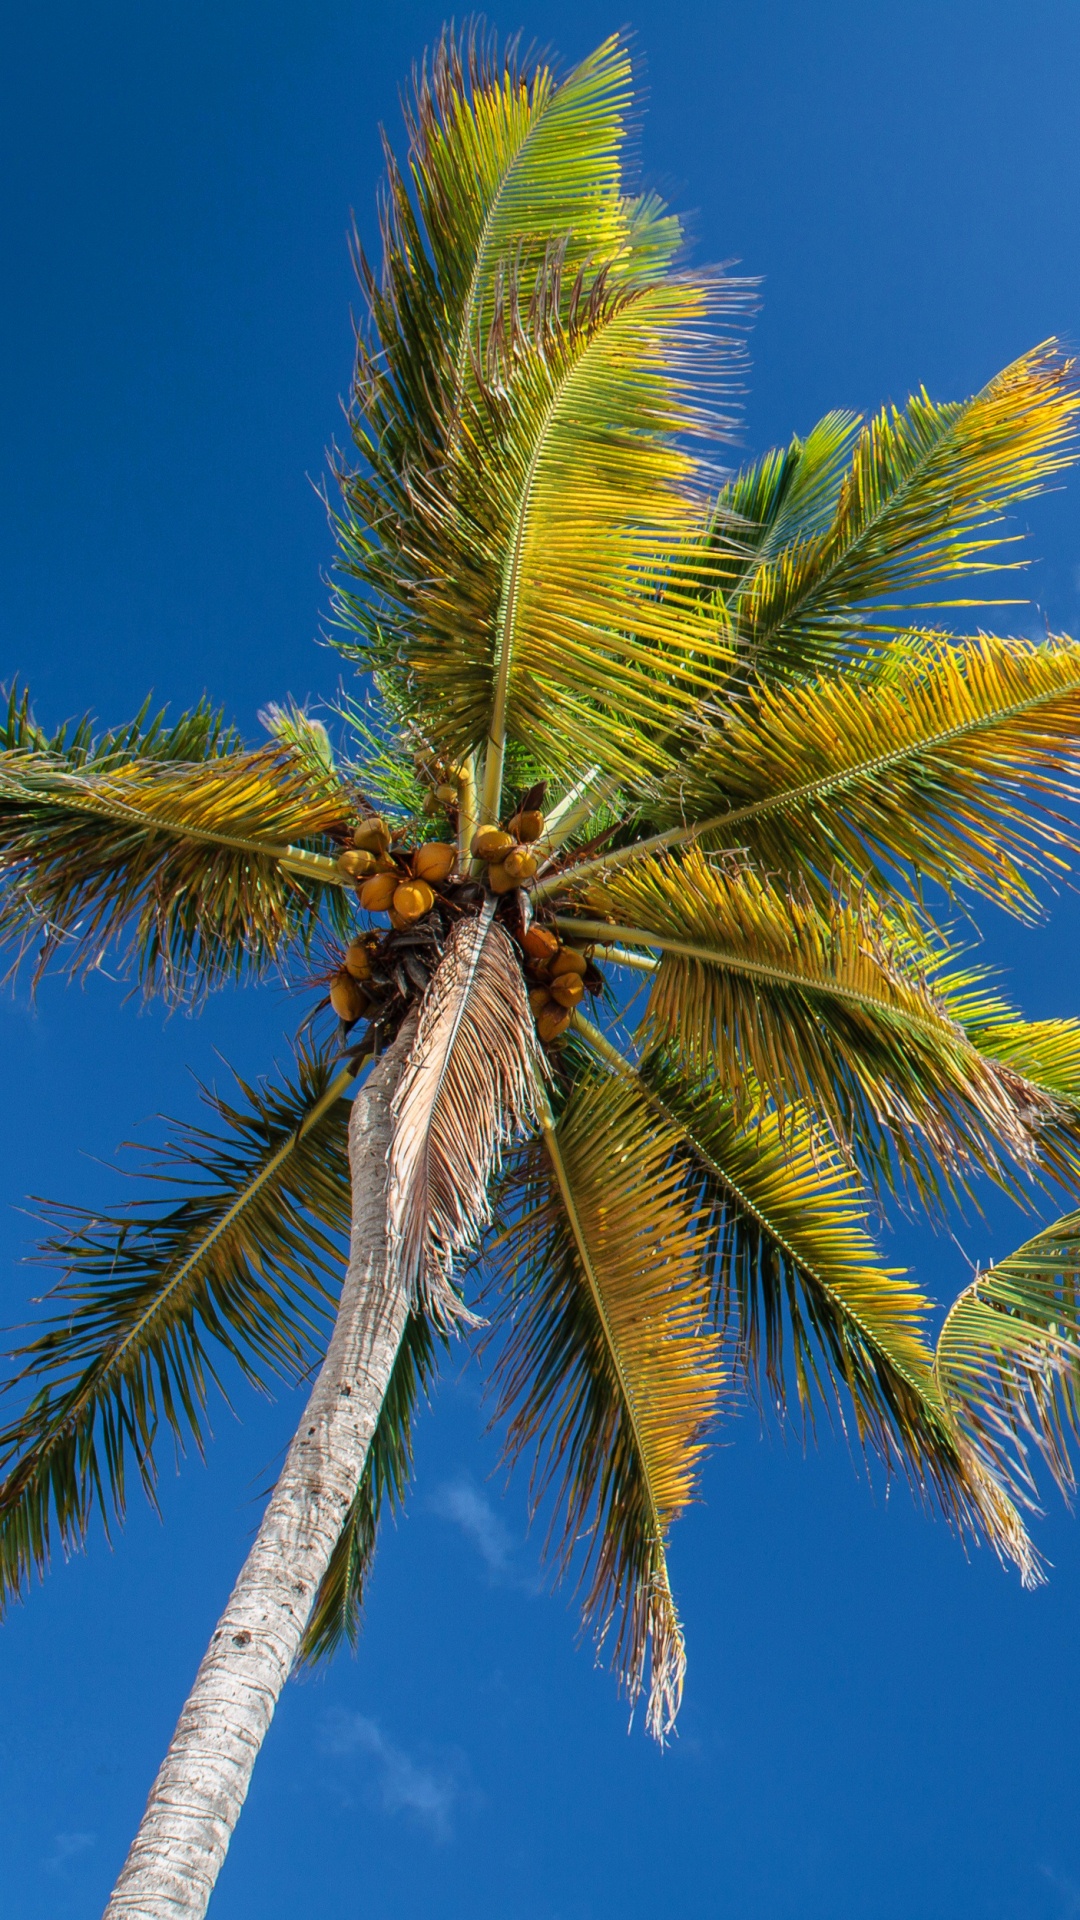 Green Palm Tree Under Blue Sky During Daytime. Wallpaper in 1080x1920 Resolution